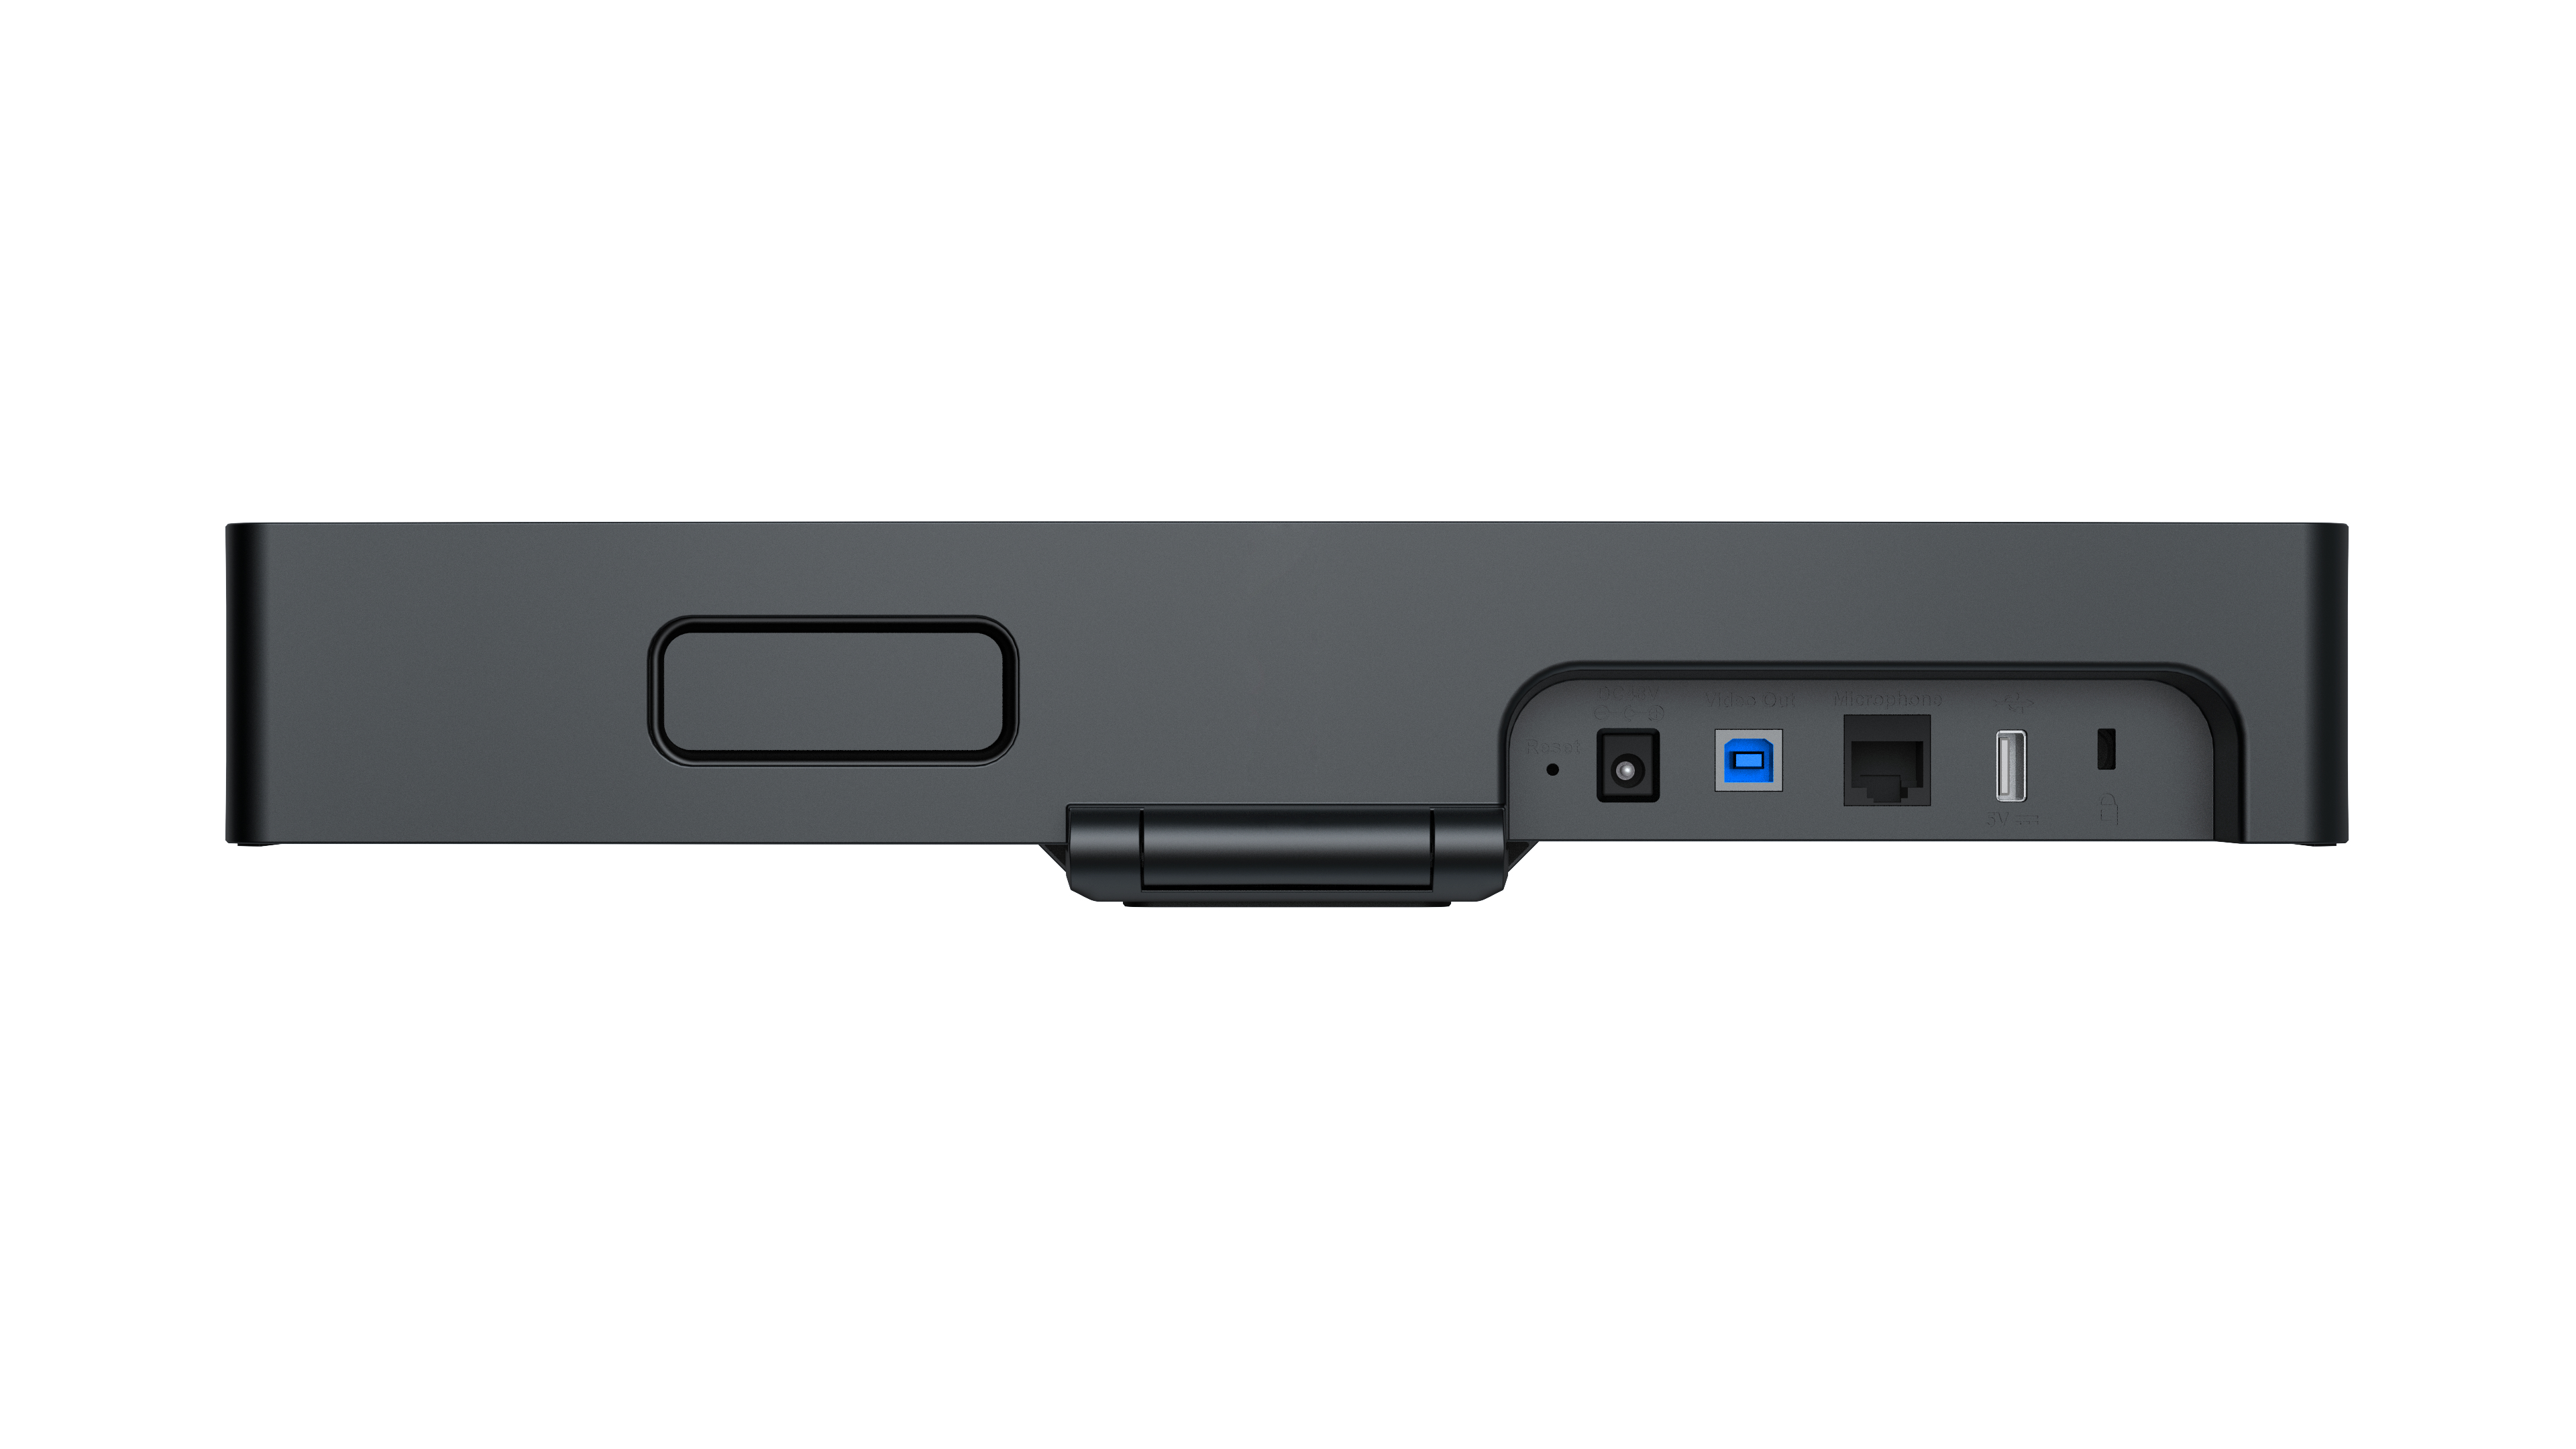 Yealink UVC34 - All-in-one USB video bar - 4K - WiFi - integrated microphones and speakers - for small rooms and huddle rooms